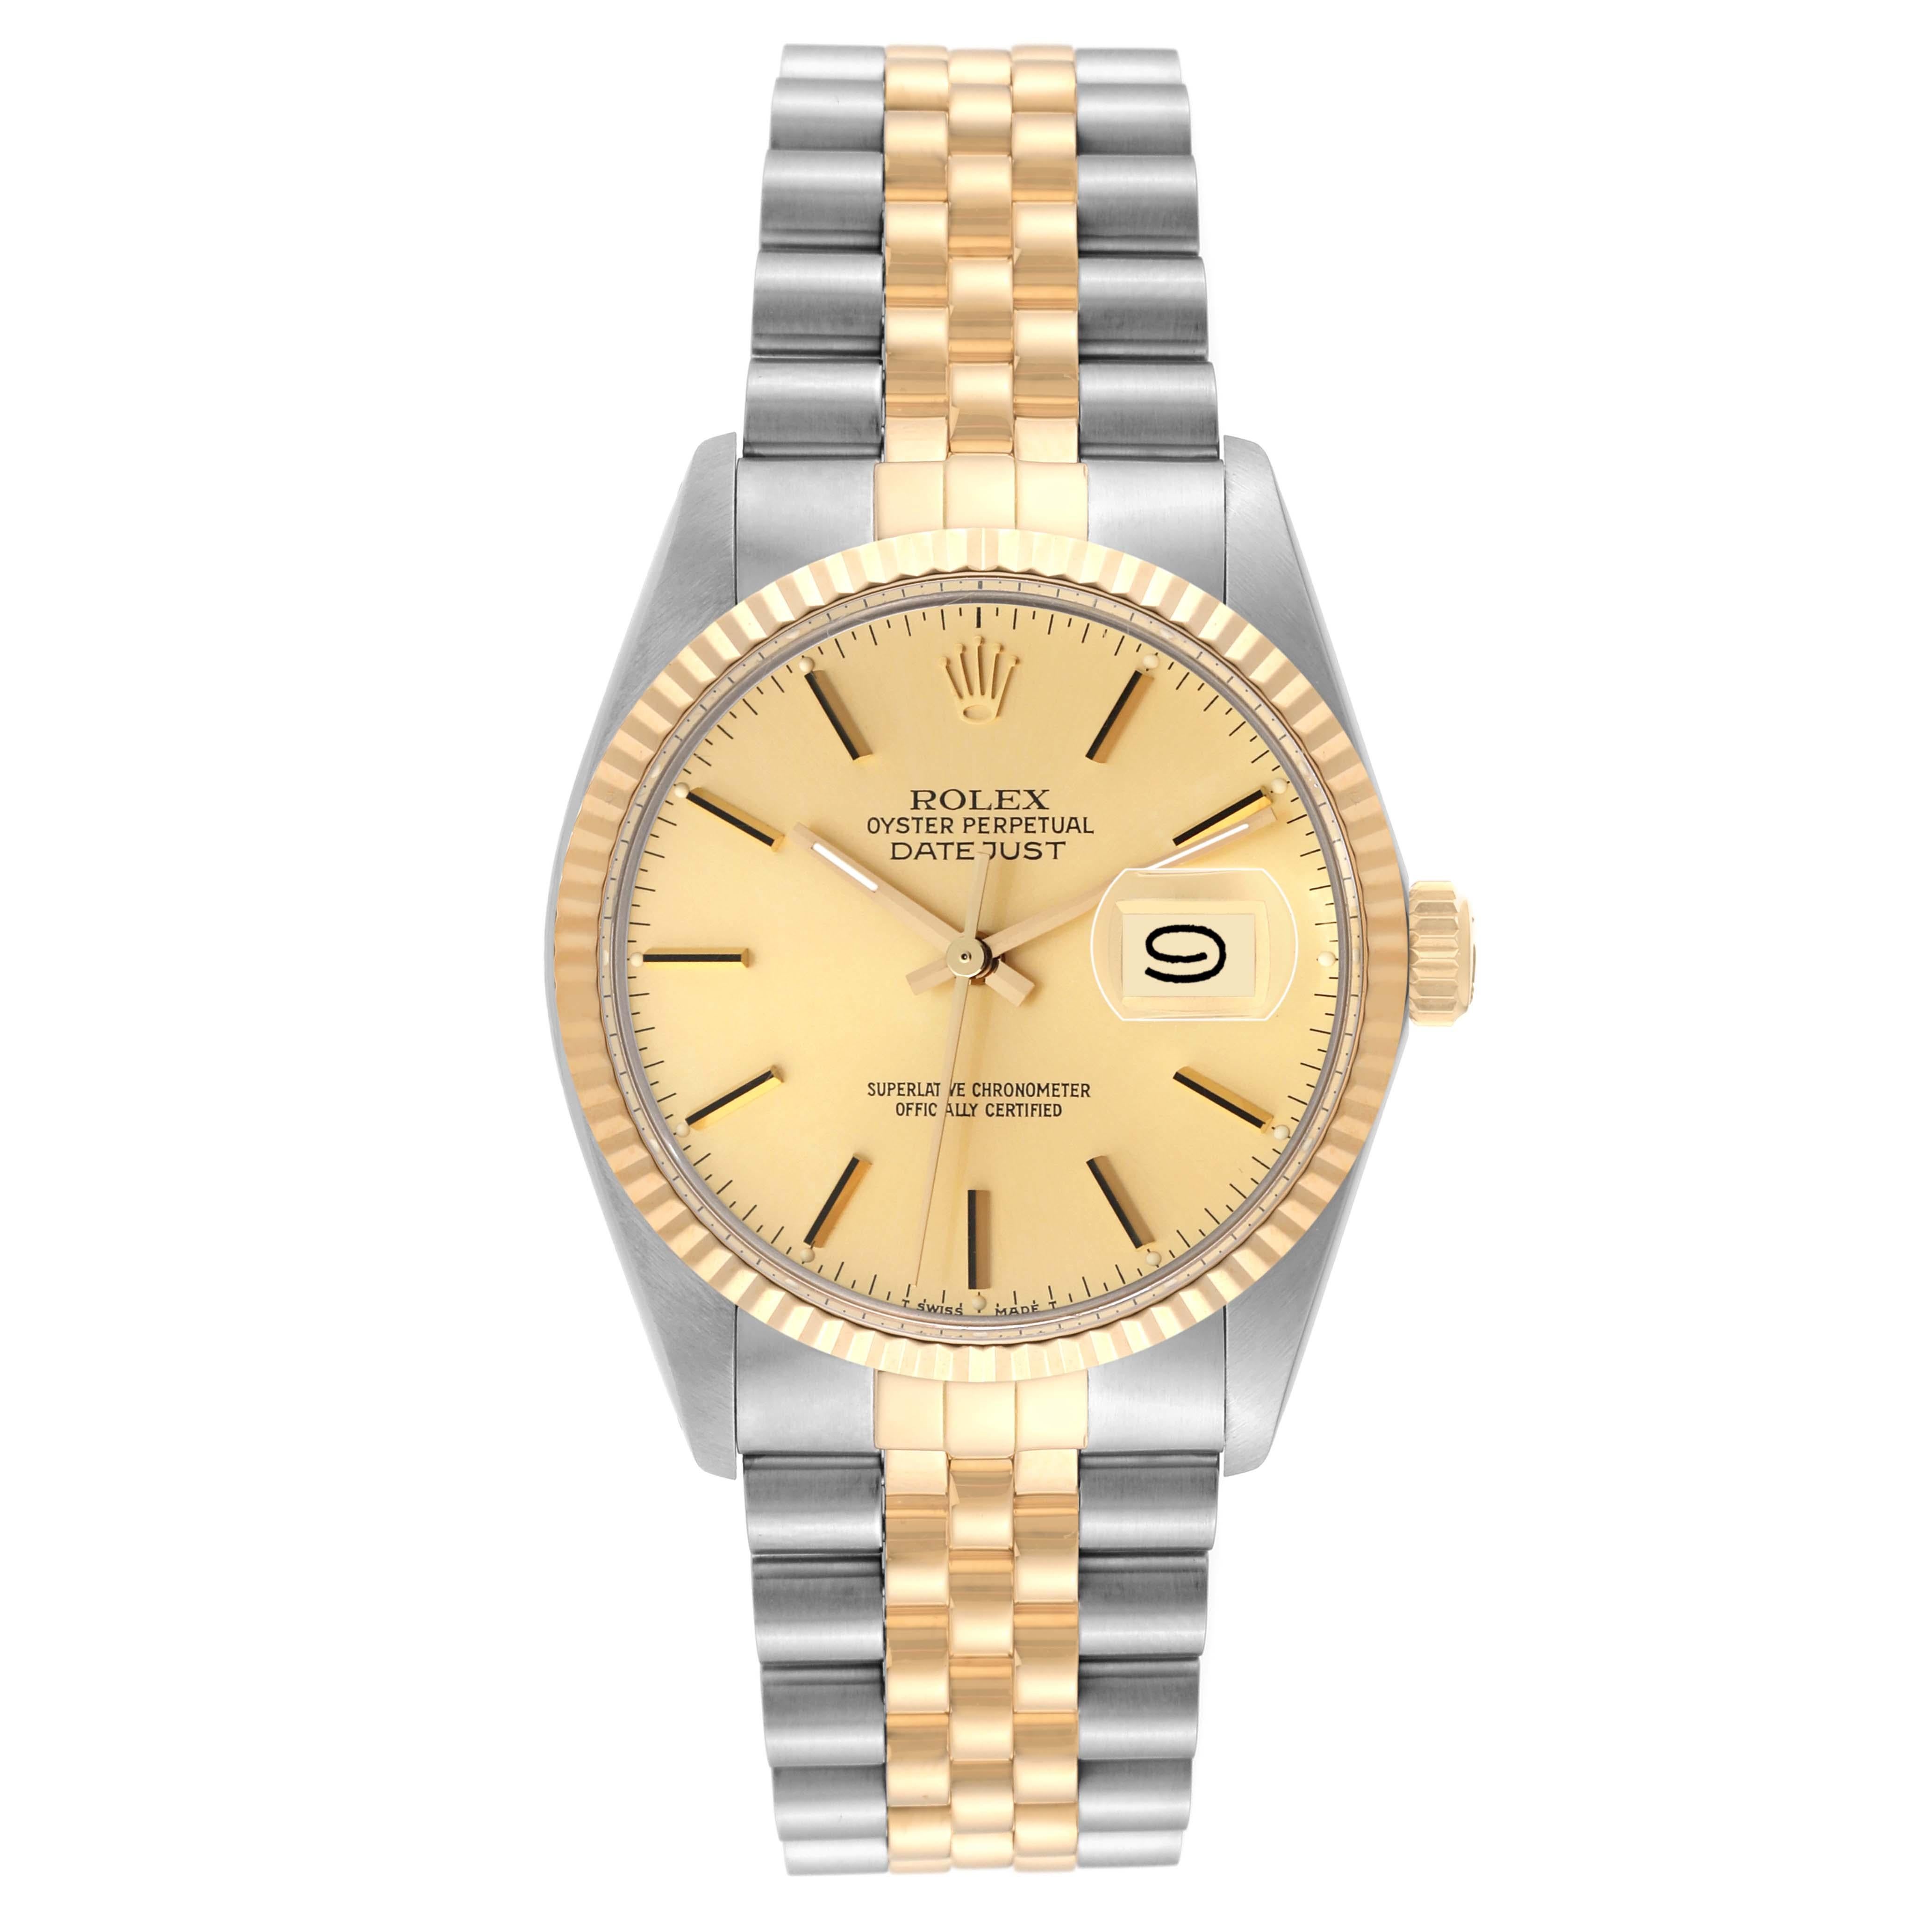 Rolex Datejust Steel Yellow Gold Vintage Mens Watch 16013 Box Papers 1